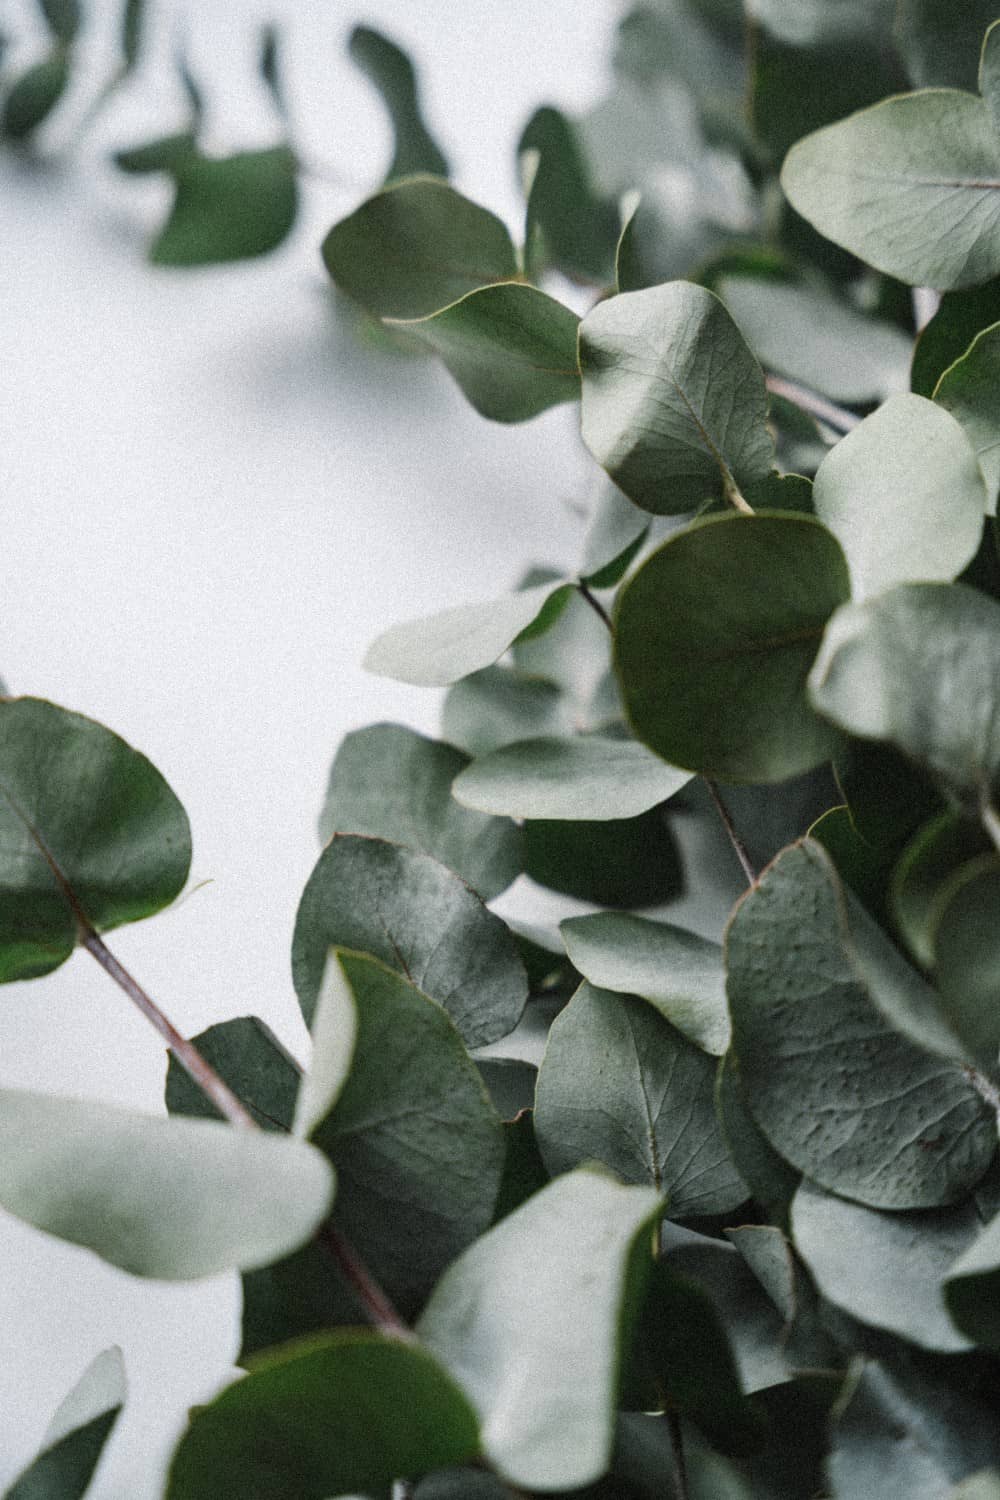 How To Make The Most Out of Eucalyptus